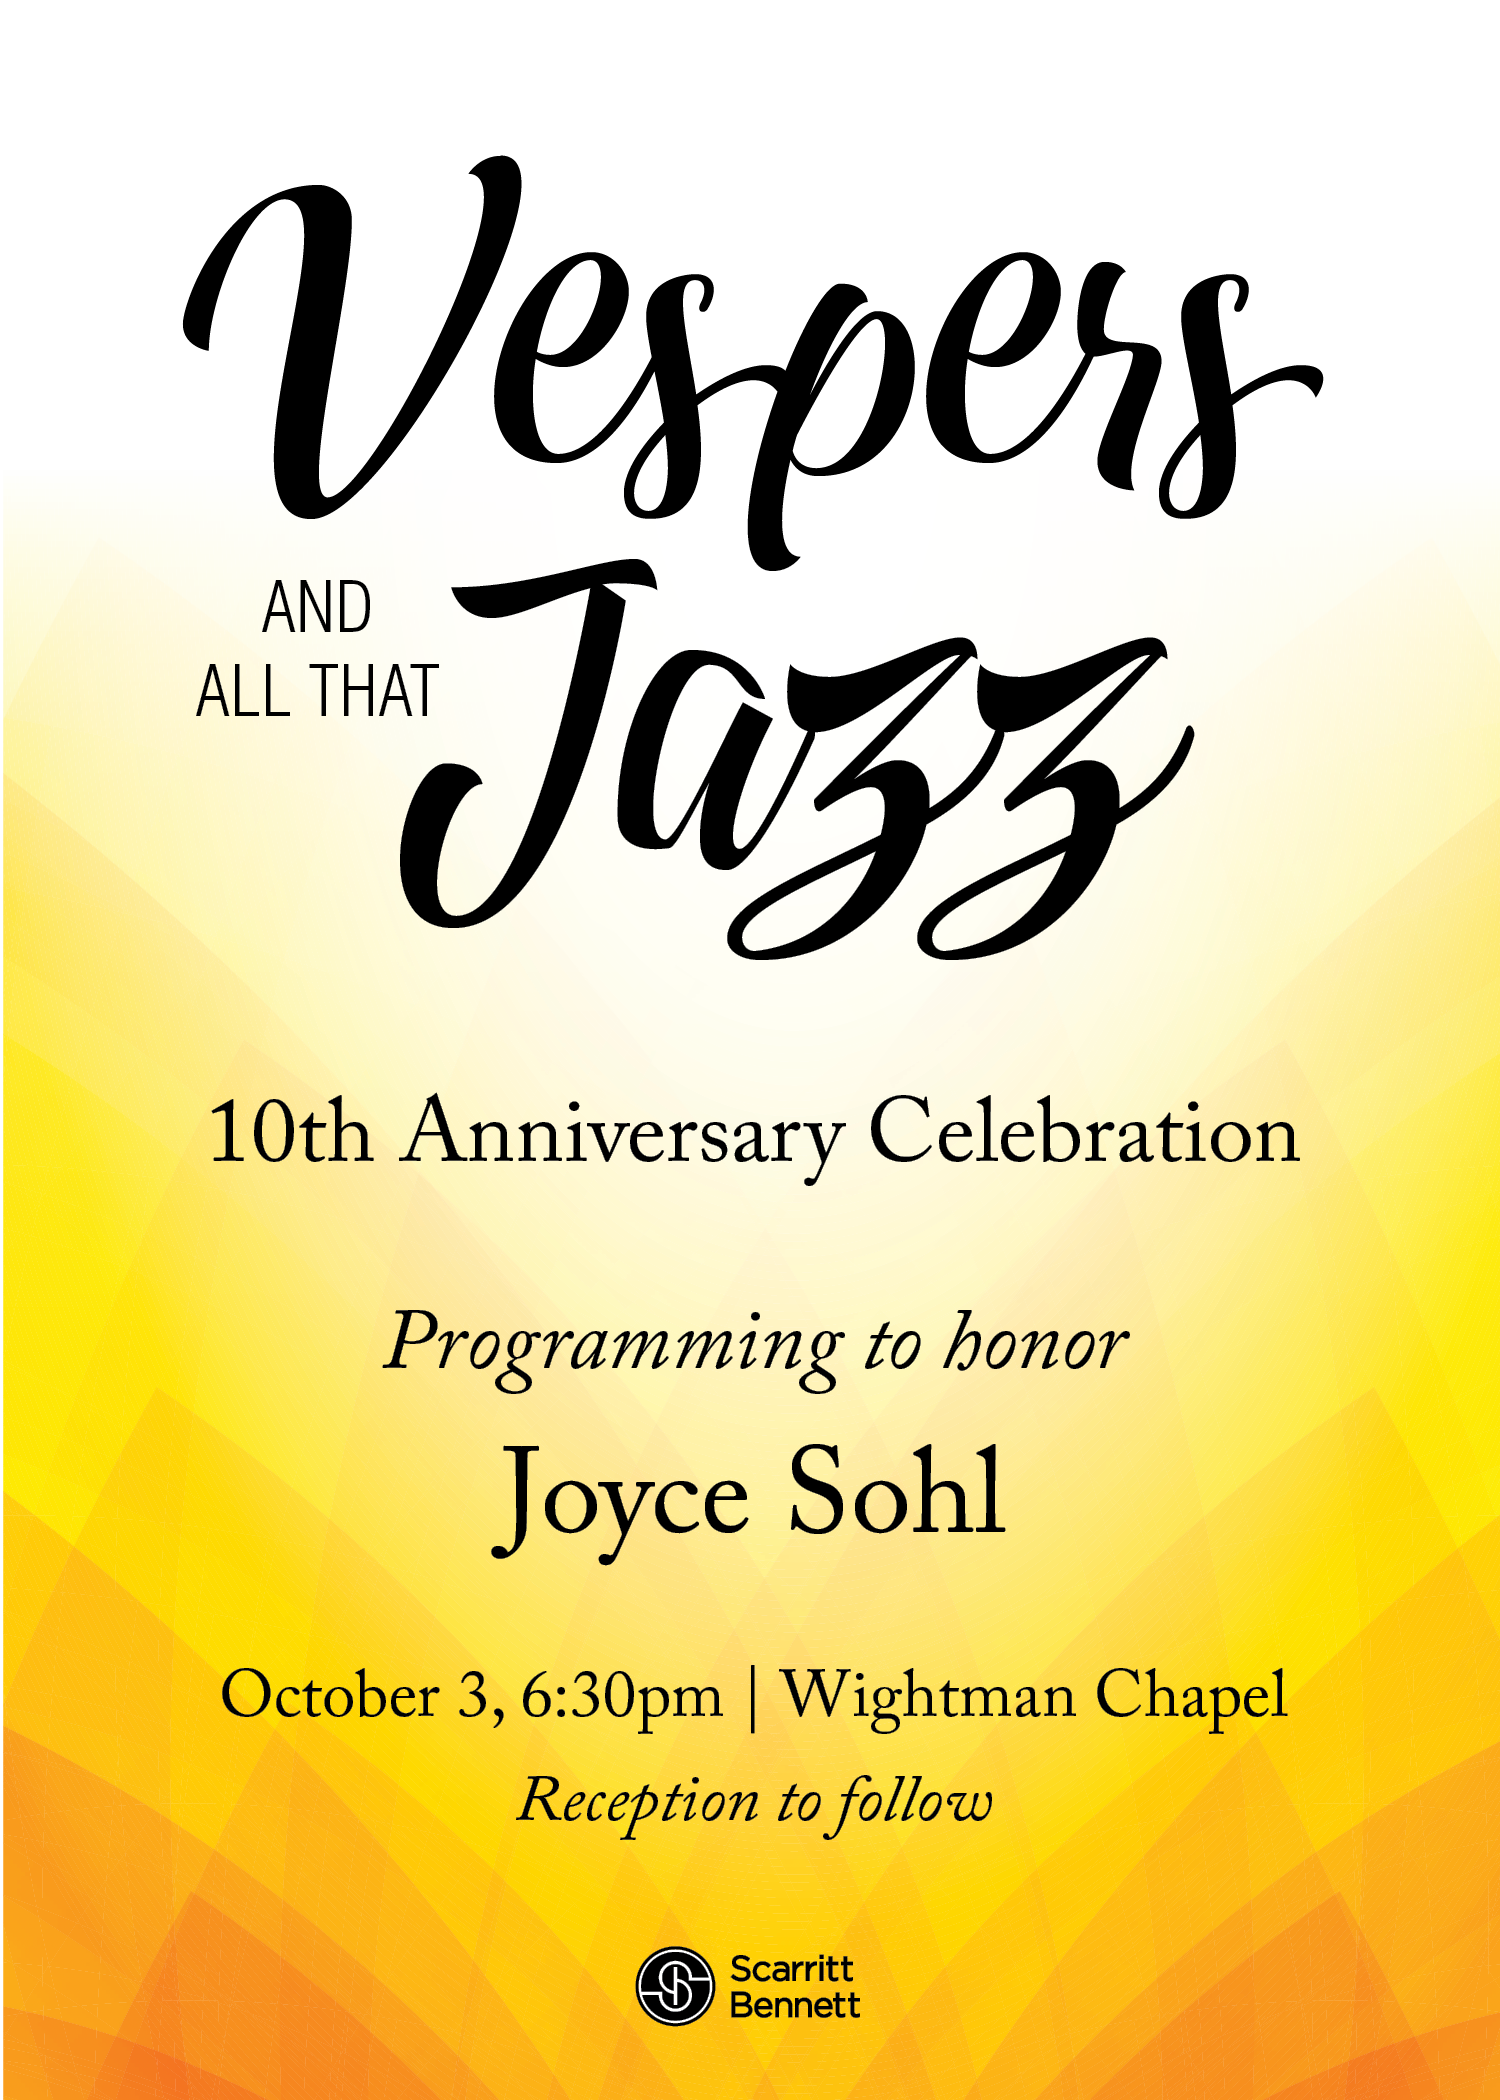 Vespers &amp; All That Jazz 10th Anniversary Celebration, honoring Joyce Sohl. October 3, 6:30pm in Wightman Chapel, with reception to follow